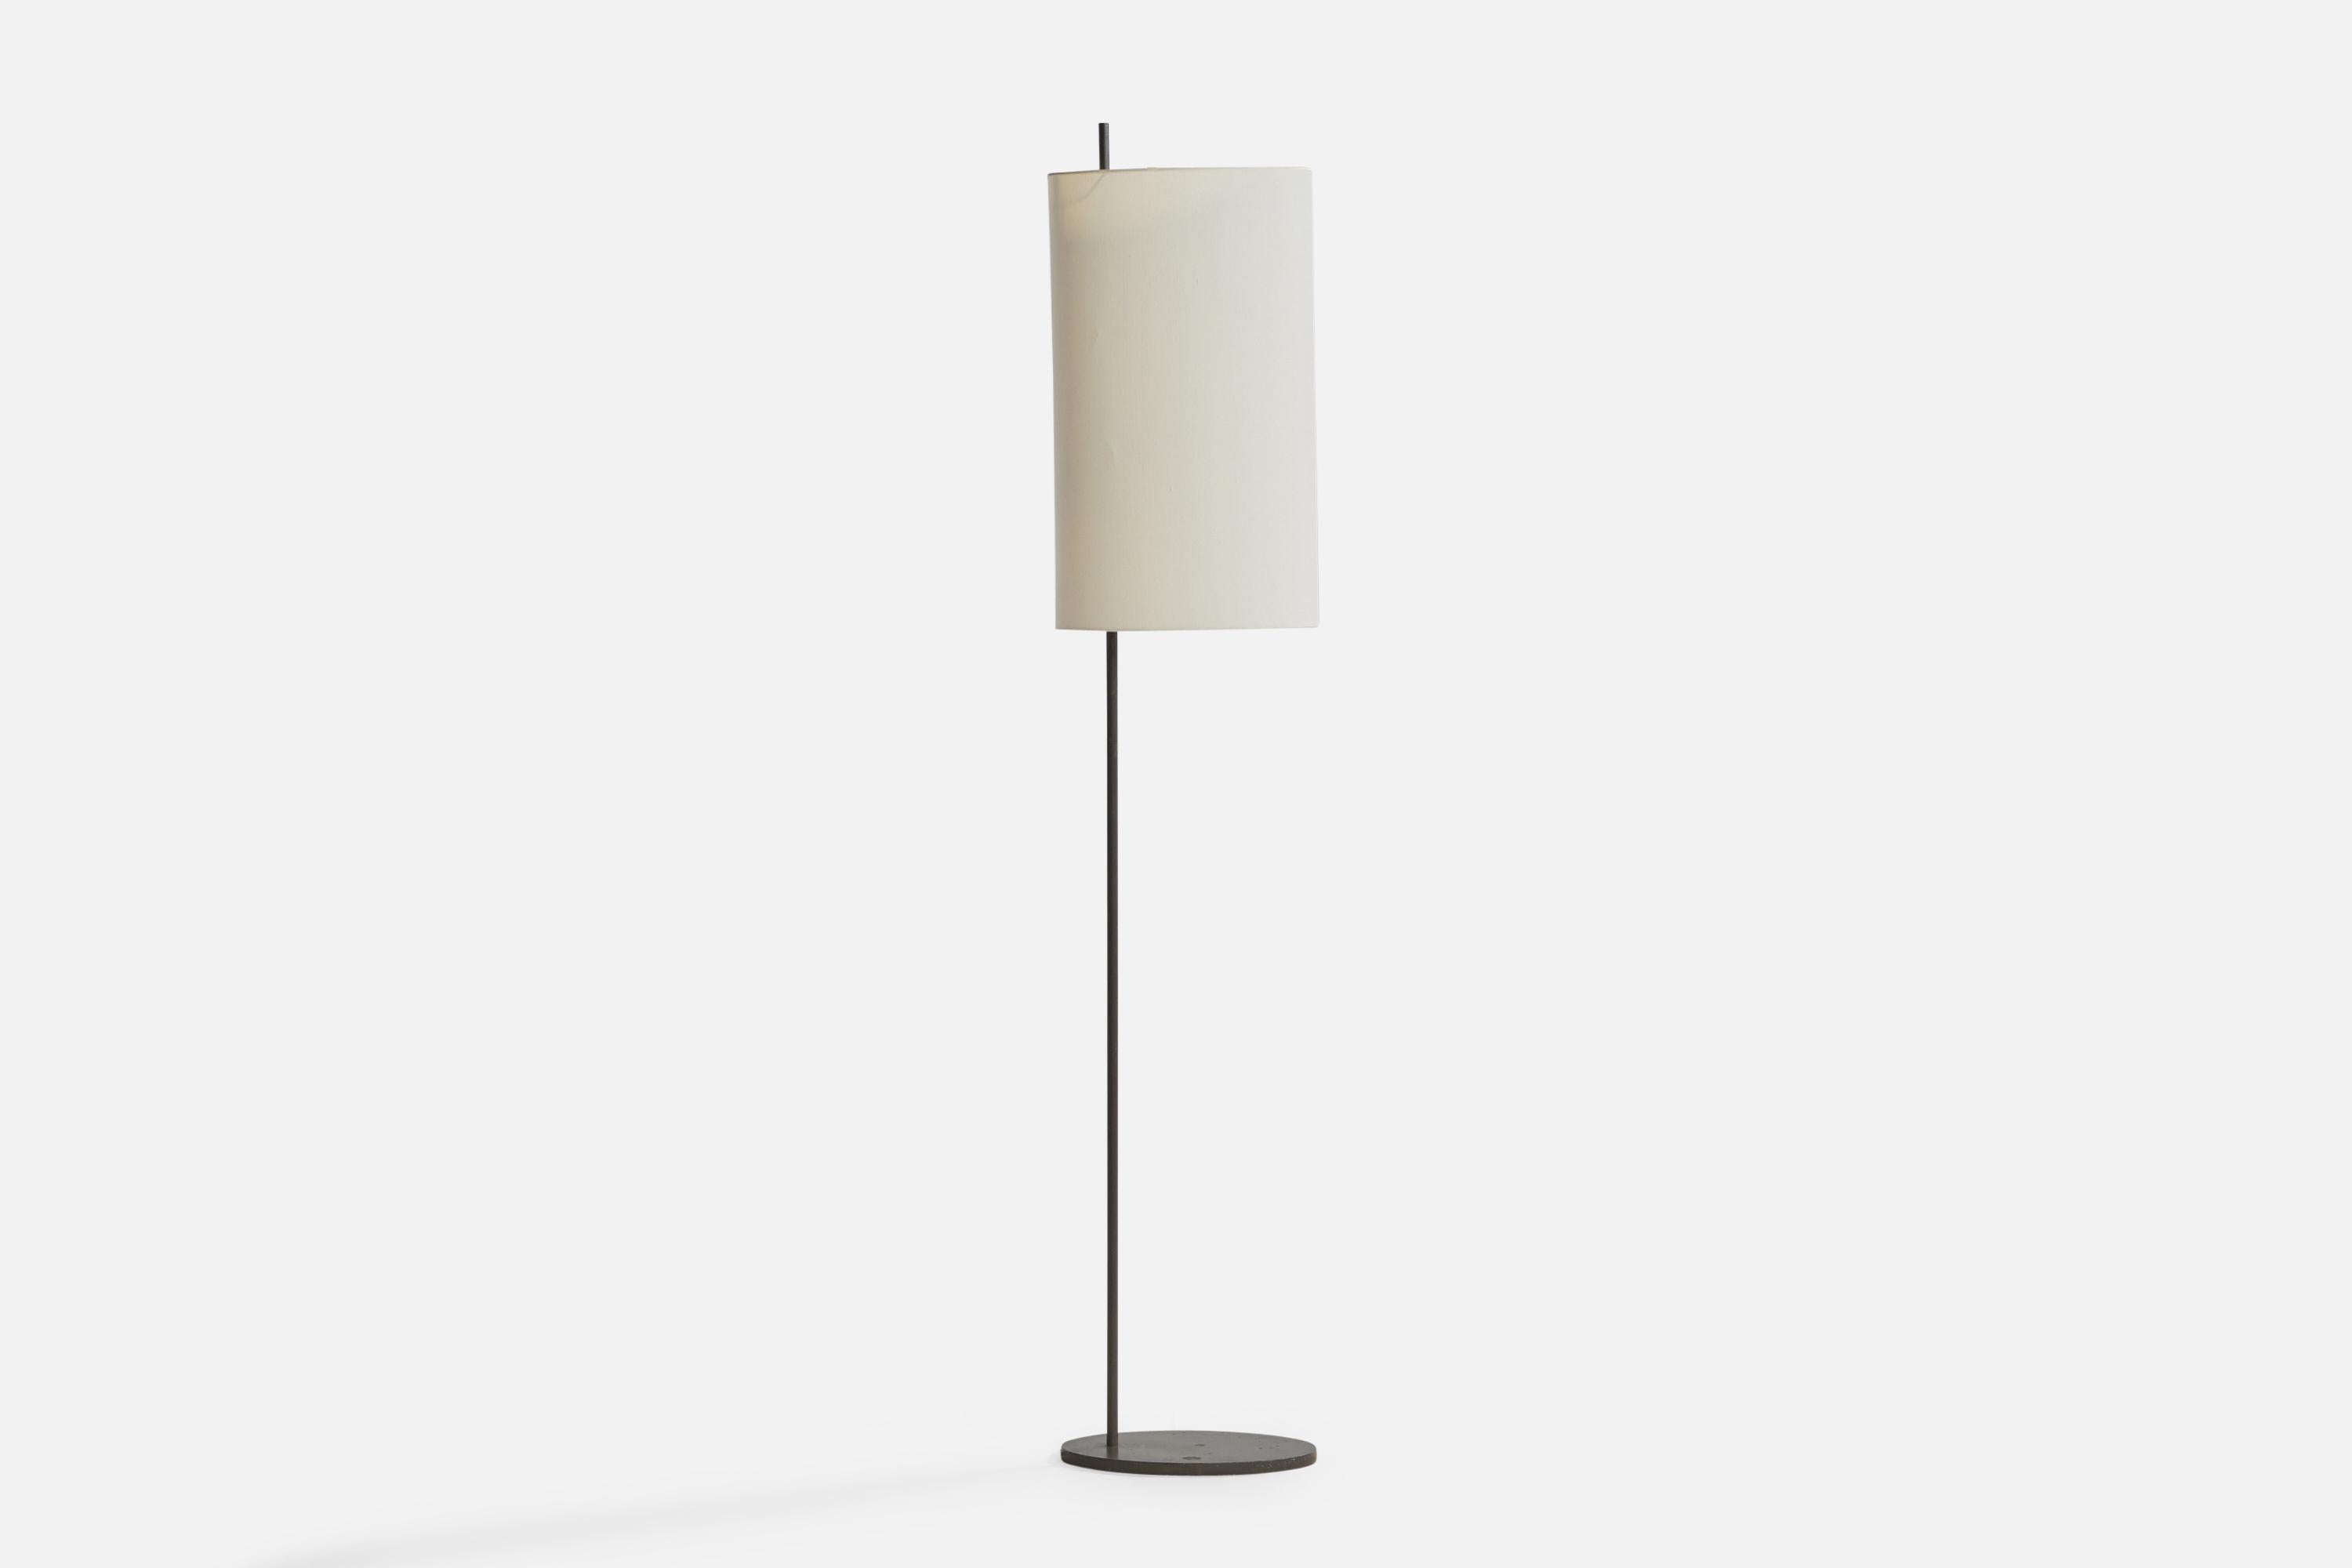 An grey-lacquered metal and paper floor lamp designed by Arne Jacobsen and produced by Louis Poulsen, Denmark, c. 1950s.

Overall Dimensions (inches): 71” H x 8.8” W x 13.75” D. Stated dimensions include shades.
Bulb Specifications: E-26 Bulb
Number